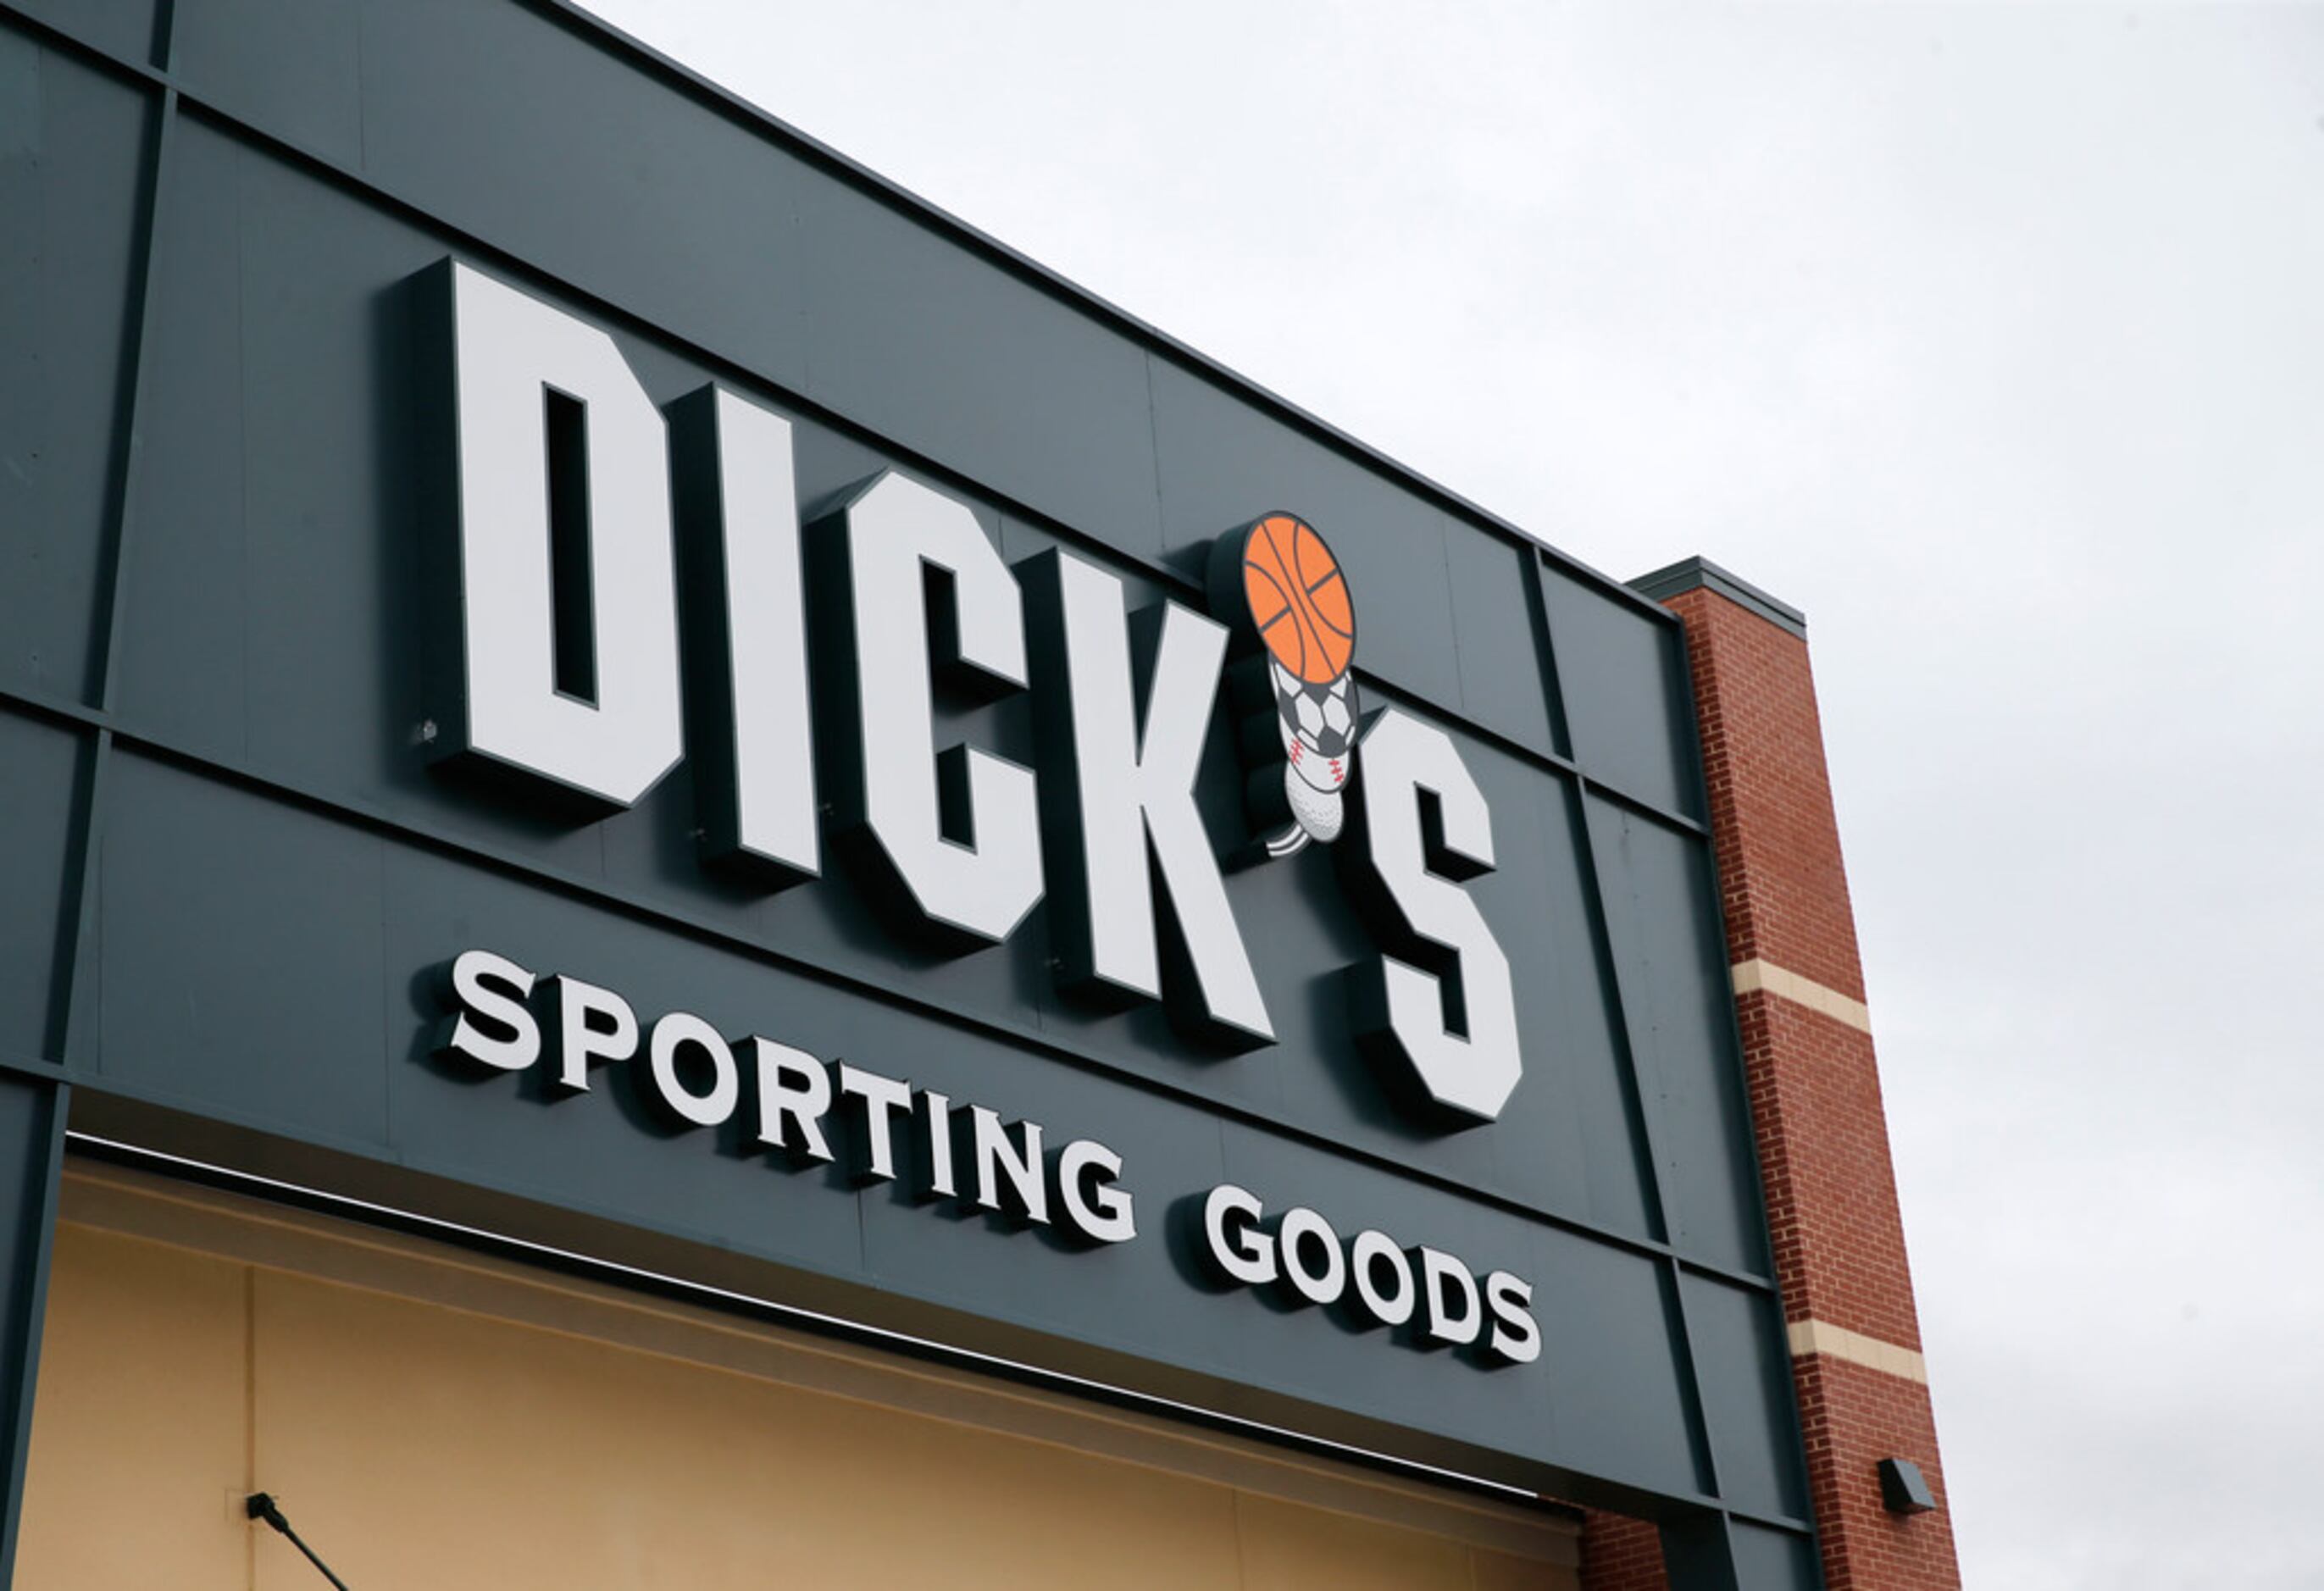 DICK'S Sporting Goods Hours, Locations & Stores